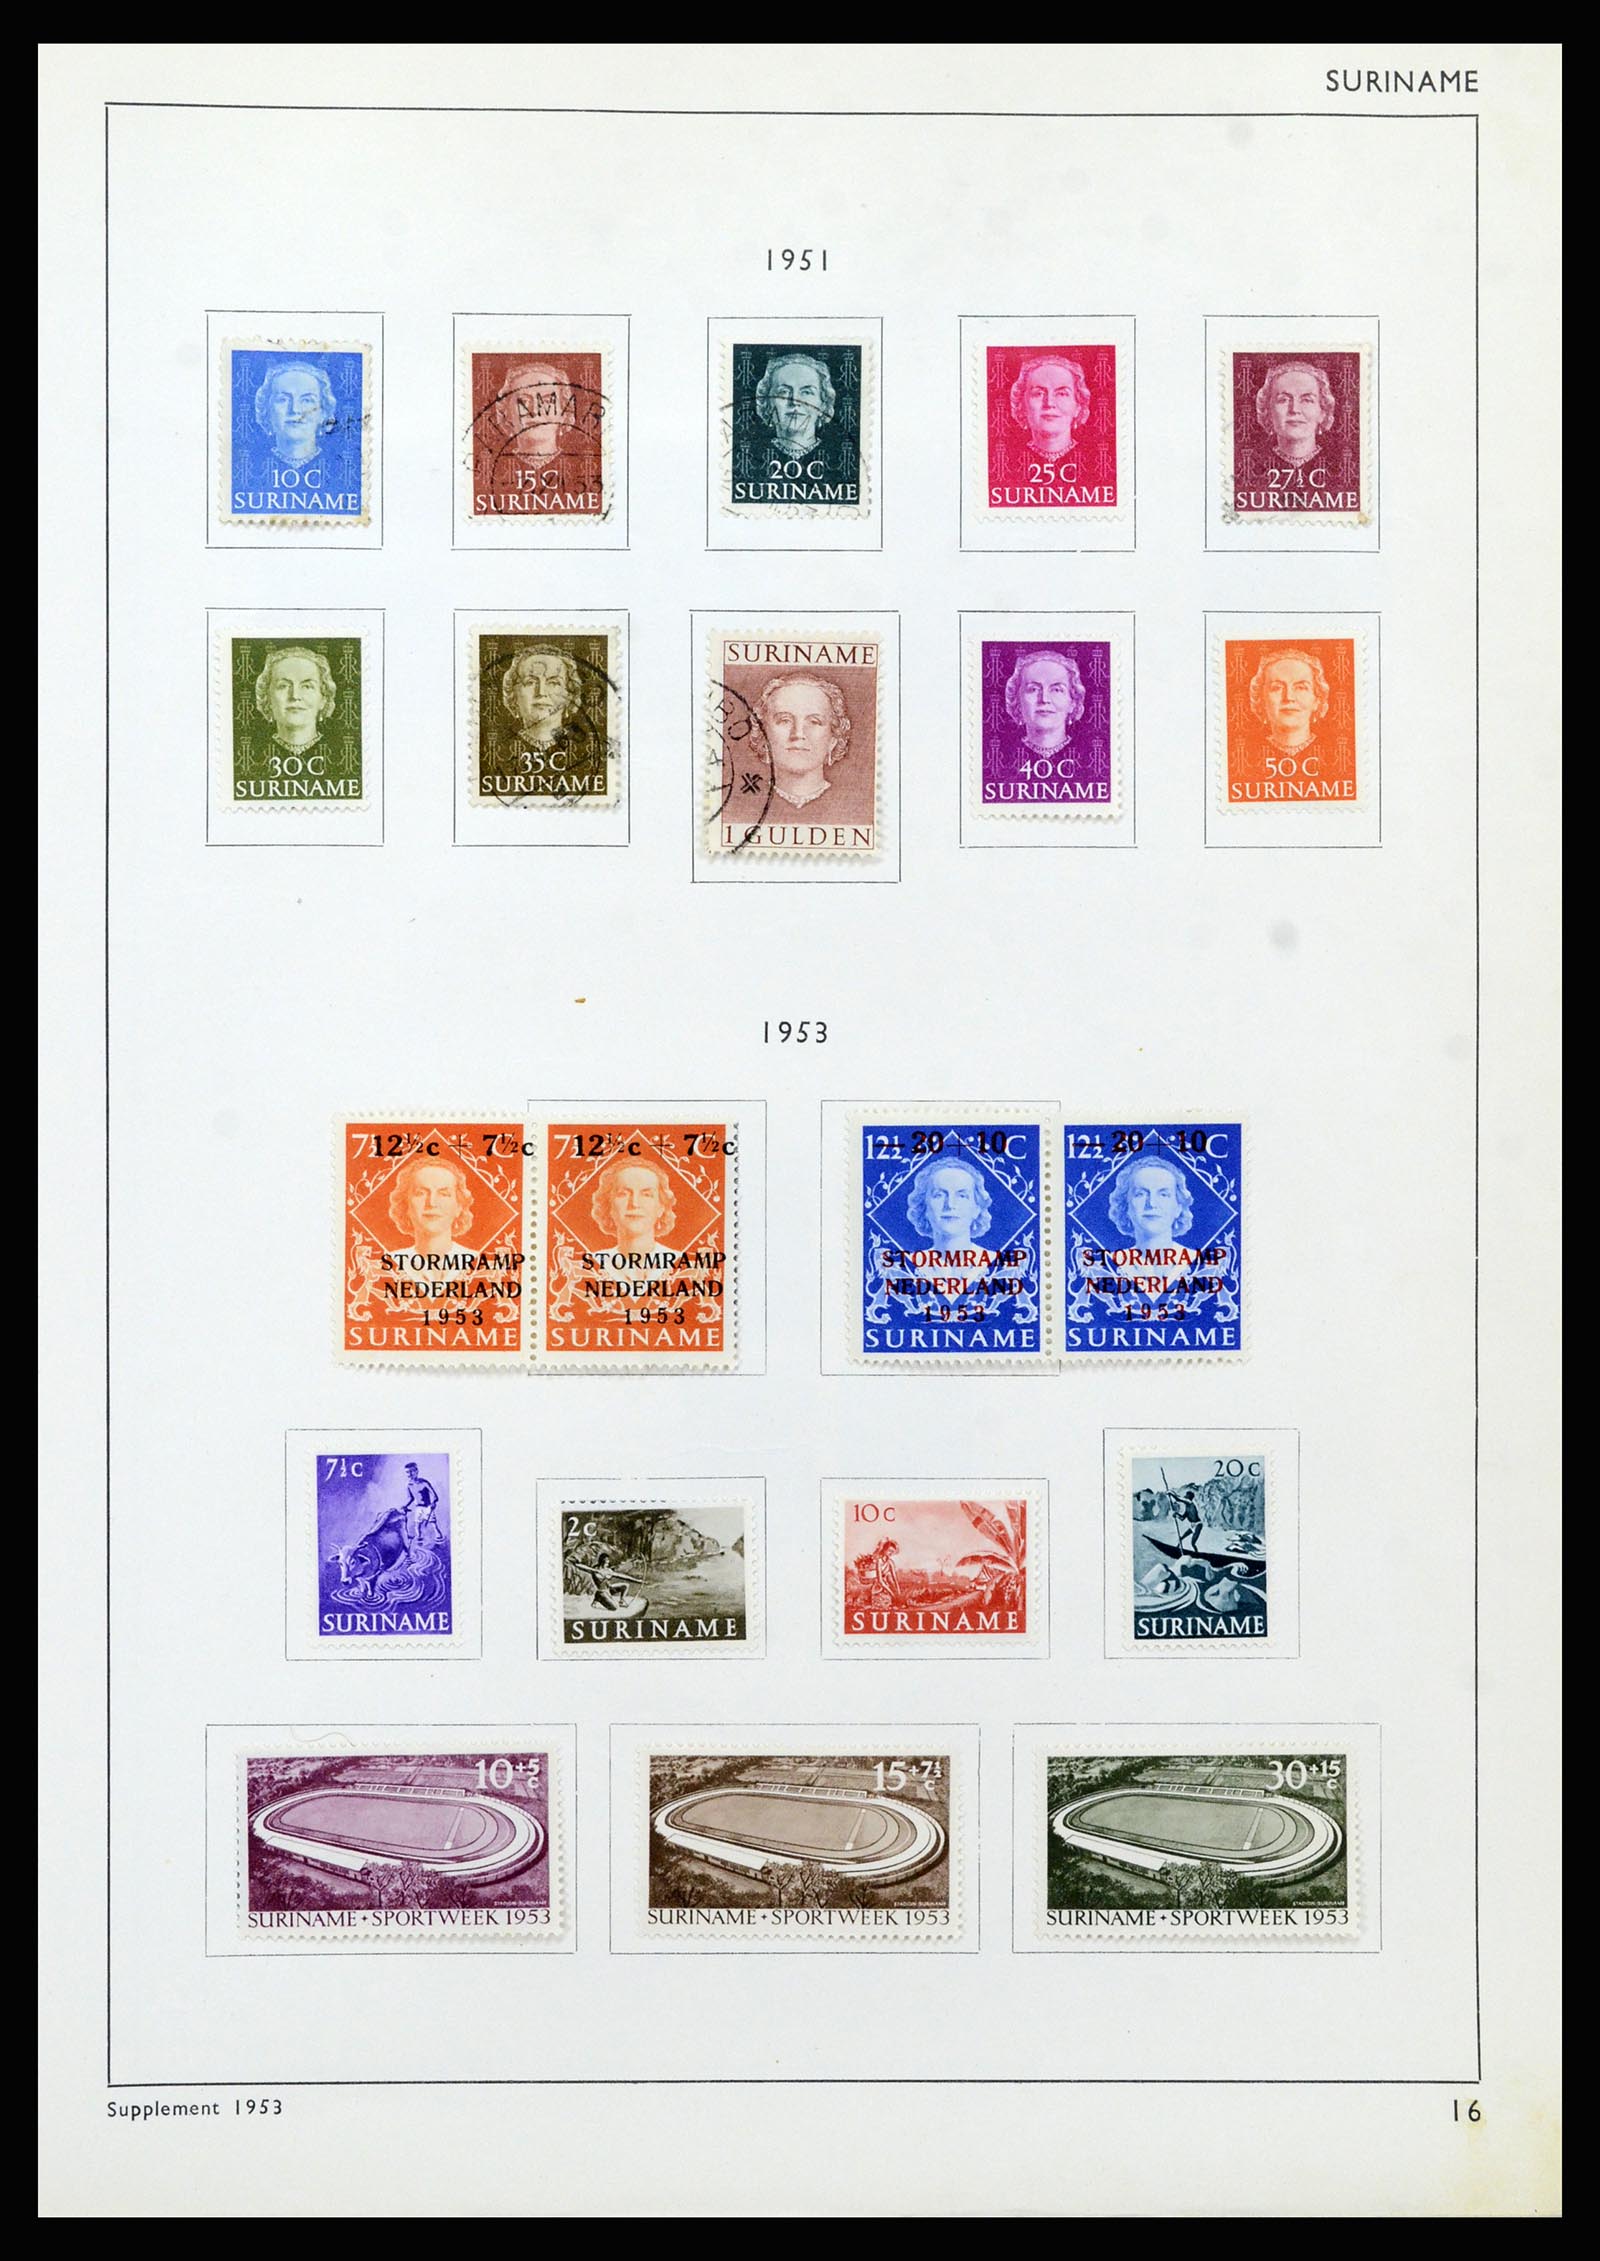 37217 099 - Stamp collection 37217 Dutch territories 1864-1975.